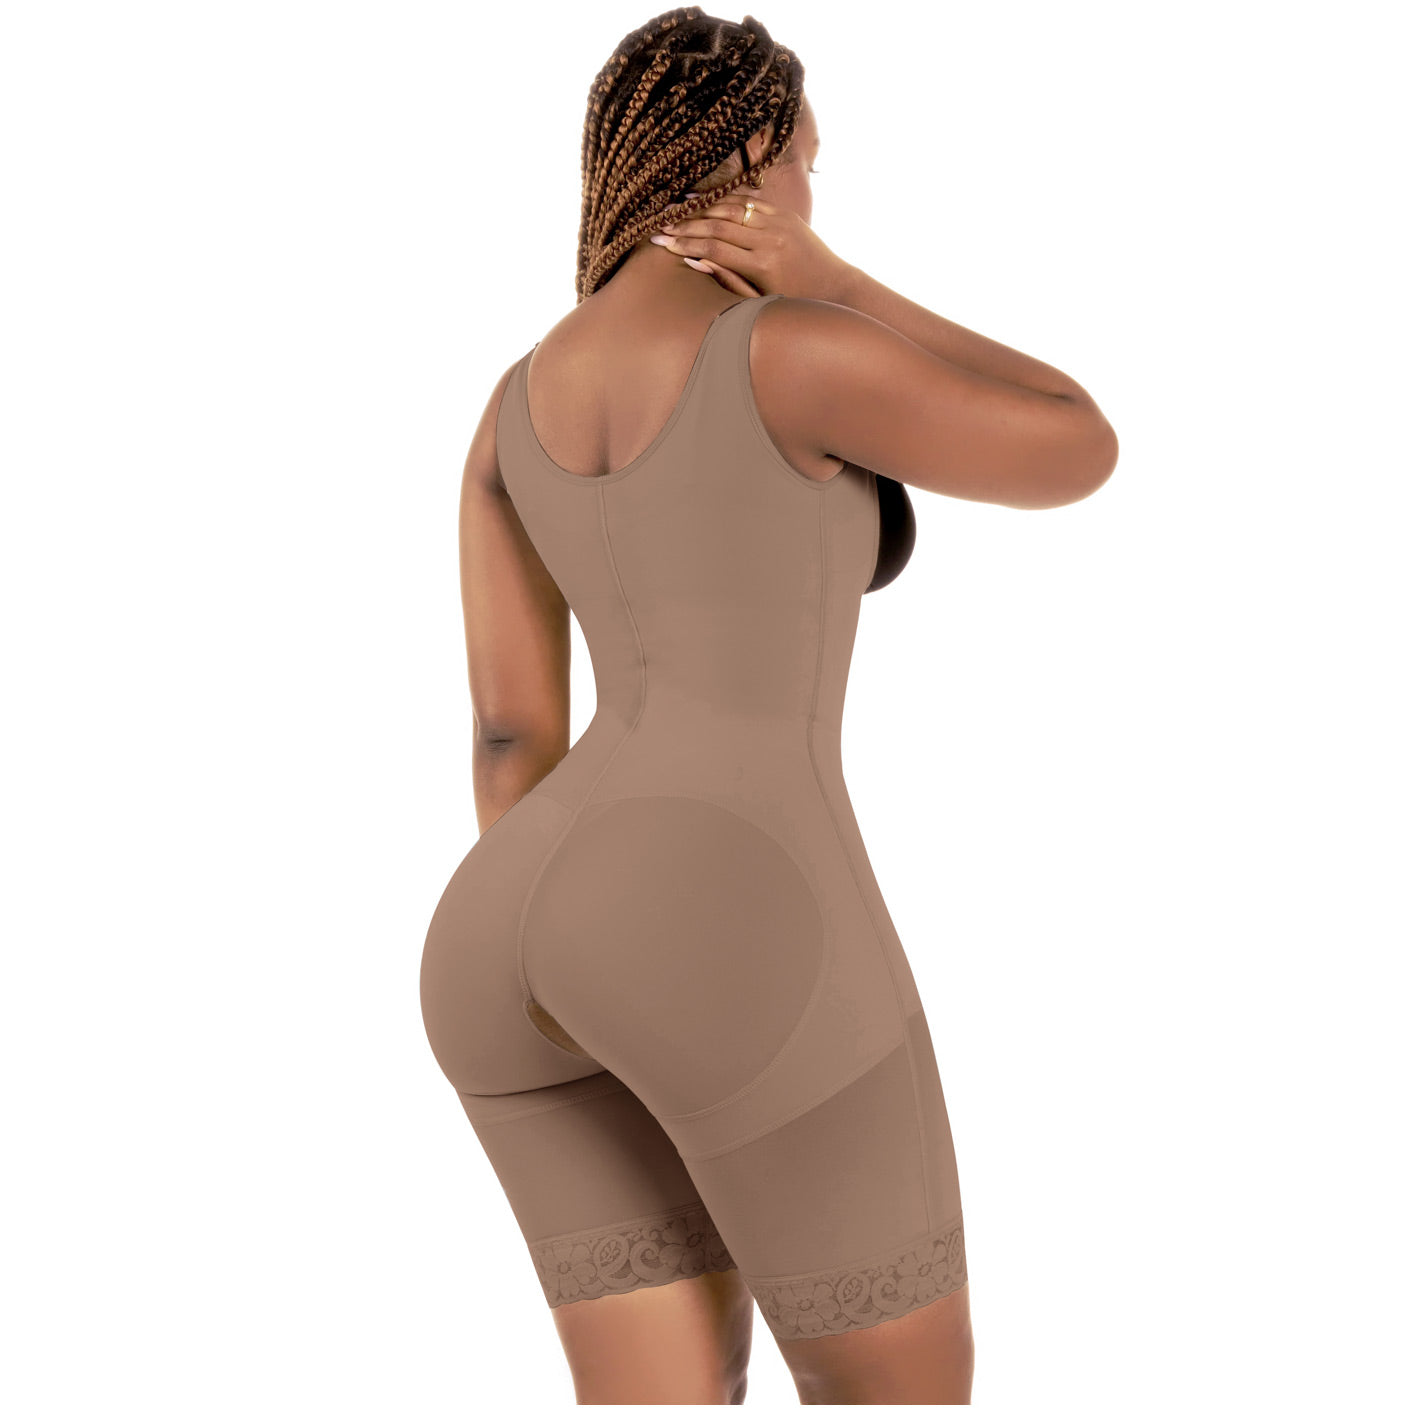 Bling Shapers 098 | Colombian Butt Lift | Tummy Control Shapewear for Curvy Women with Wide Hips and Small Waist | Powernet Magic